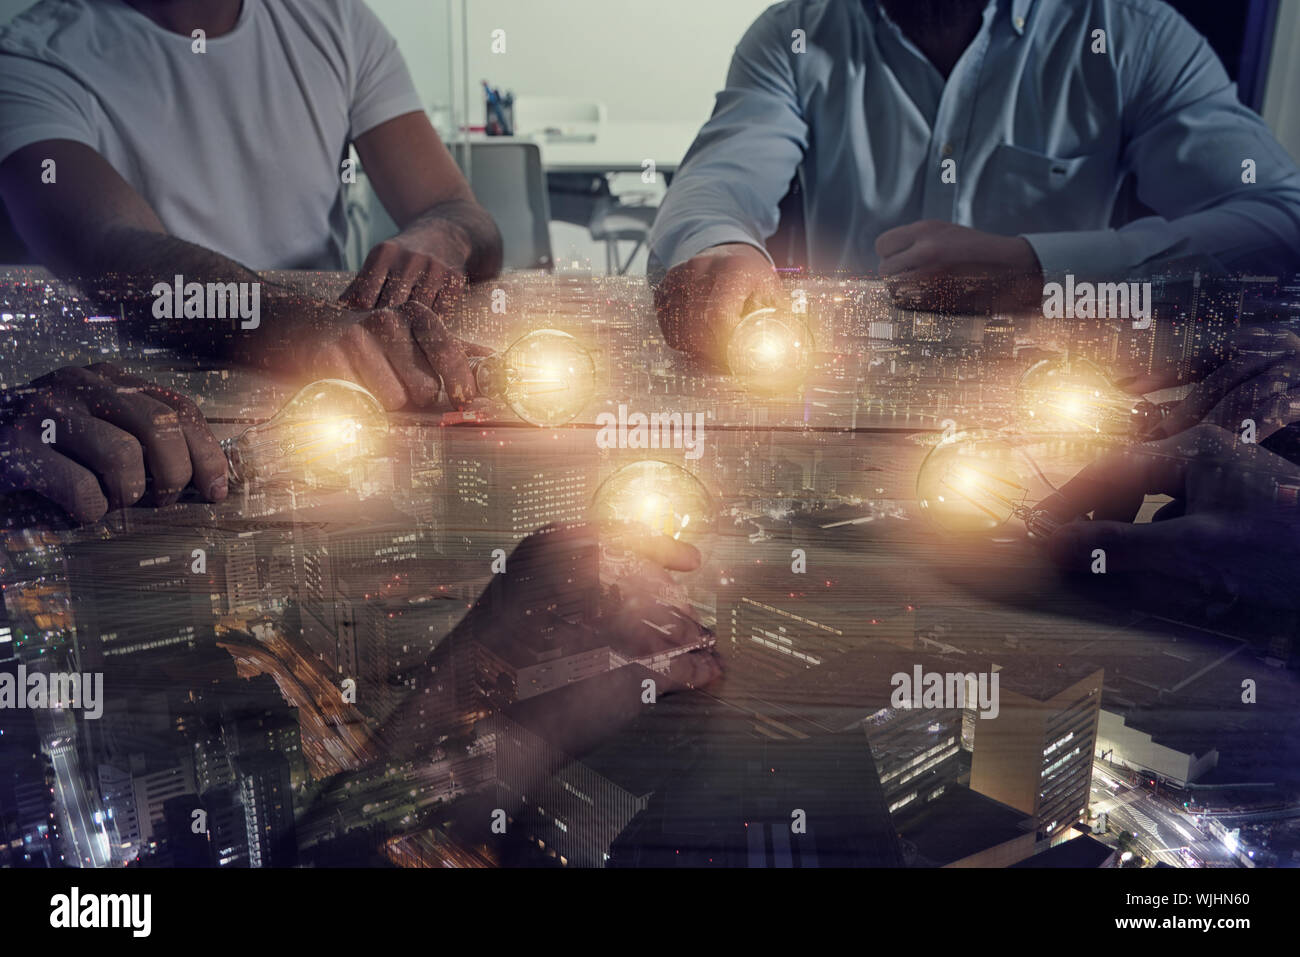 Teamwork and brainstorming concept with businessmen that share an idea with a lamp. Concept of startup. Double exposure Stock Photo